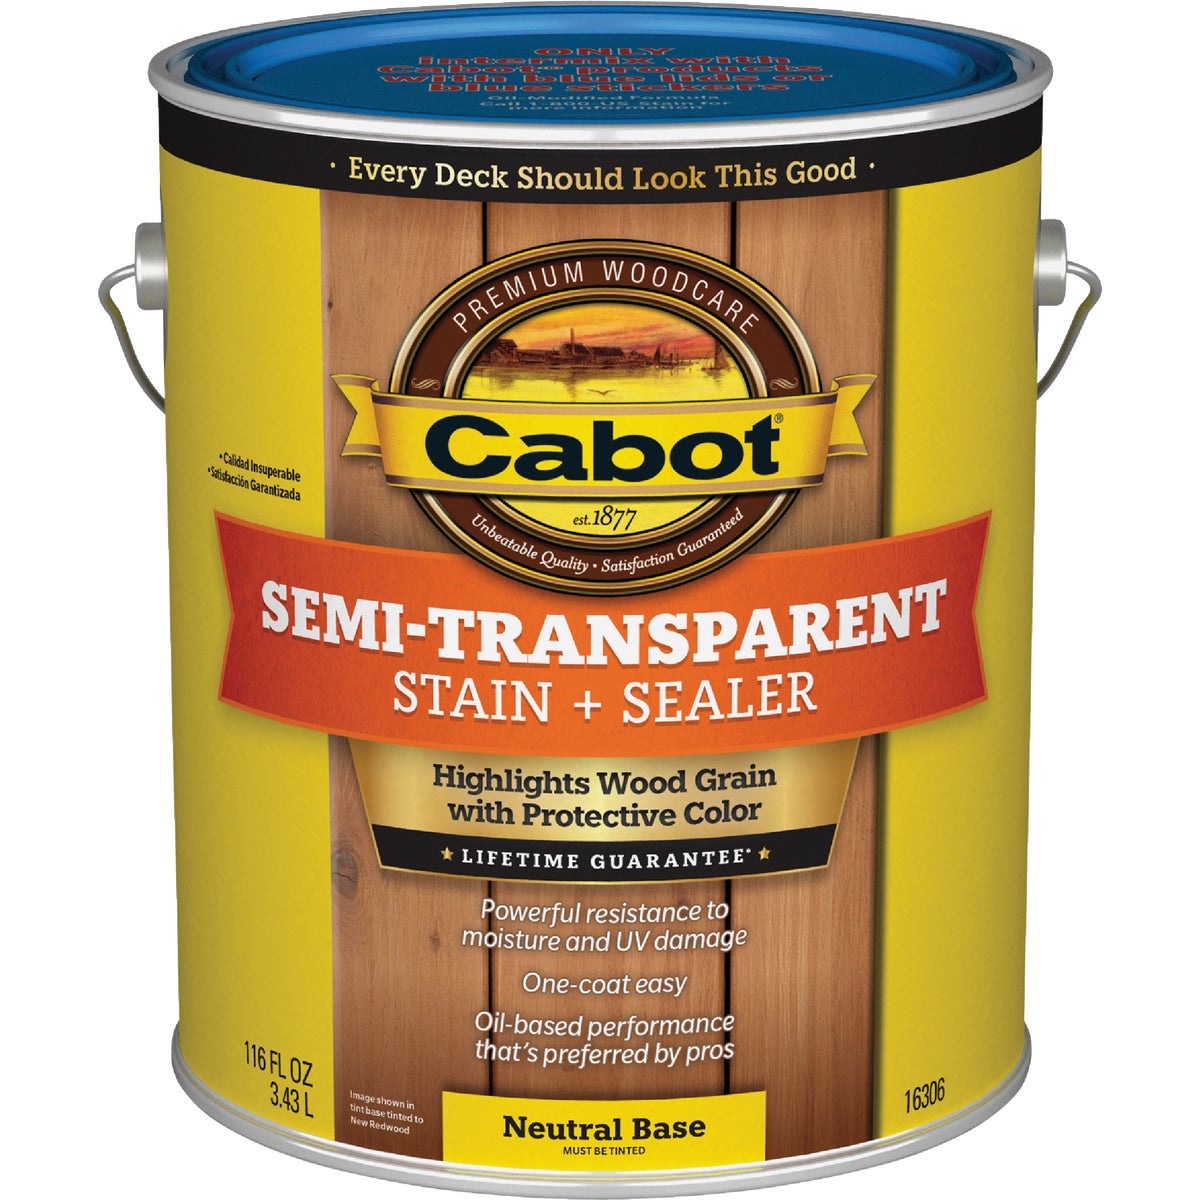 Item 770254, Deep-penetrating, oil-based stain that beautifies and protects exterior 